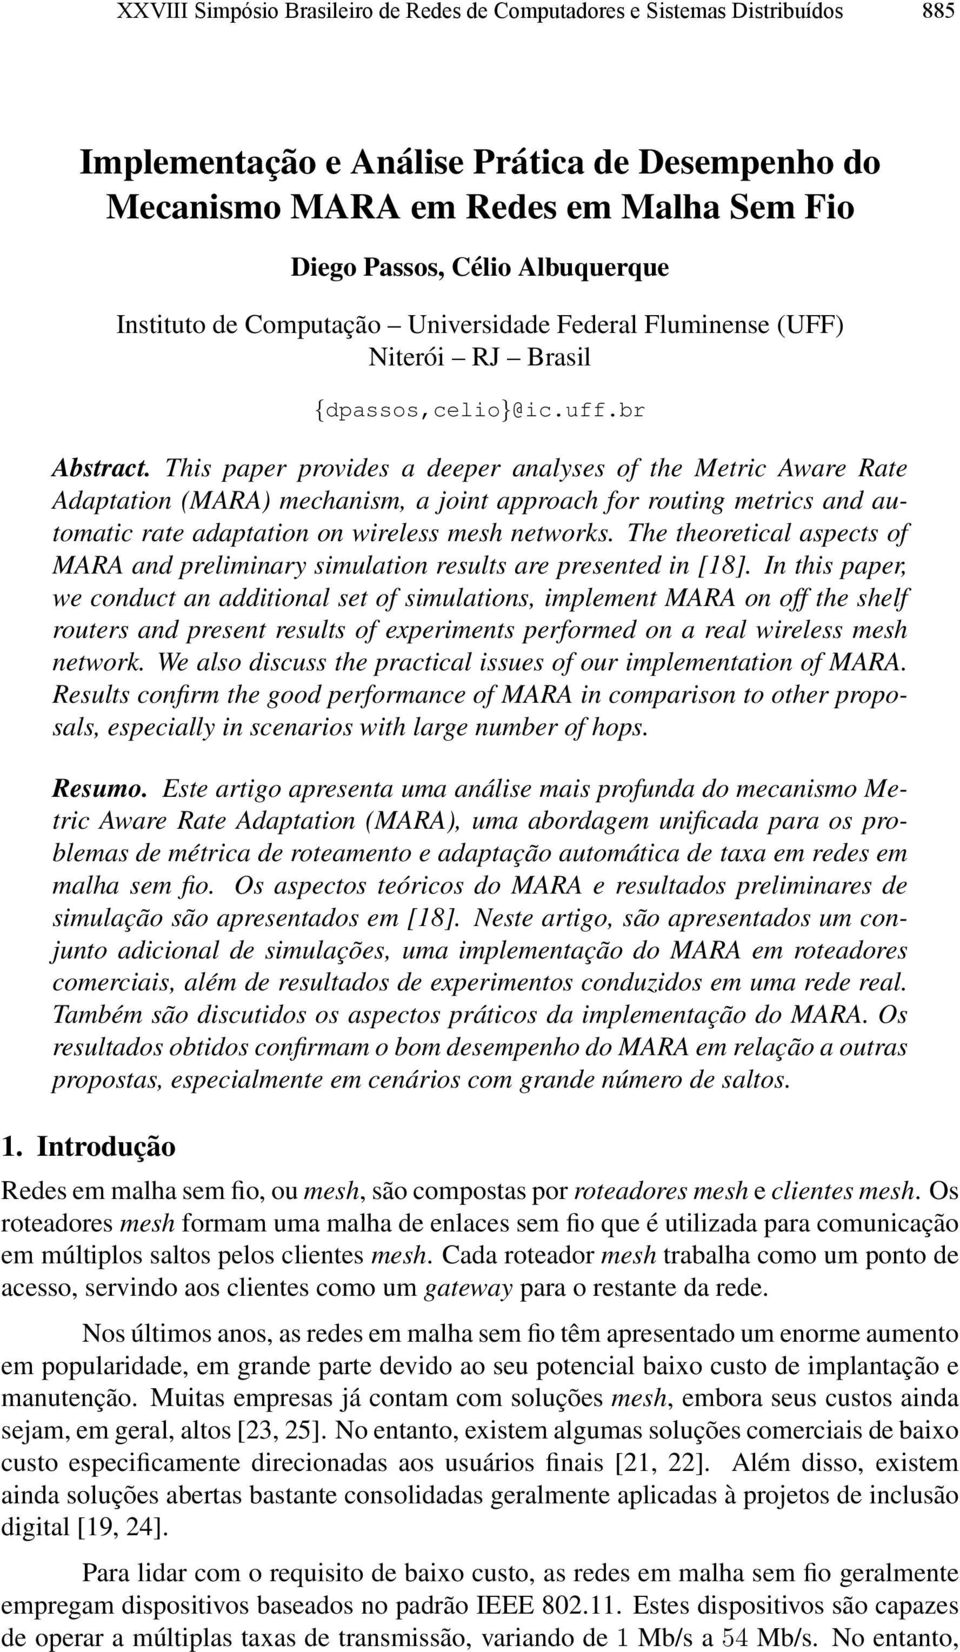 This paper provides a deeper analyses of the Metric Aware Rate Adaptation (MARA) mechanism, a joint approach for routing metrics and automatic rate adaptation on wireless mesh networks.